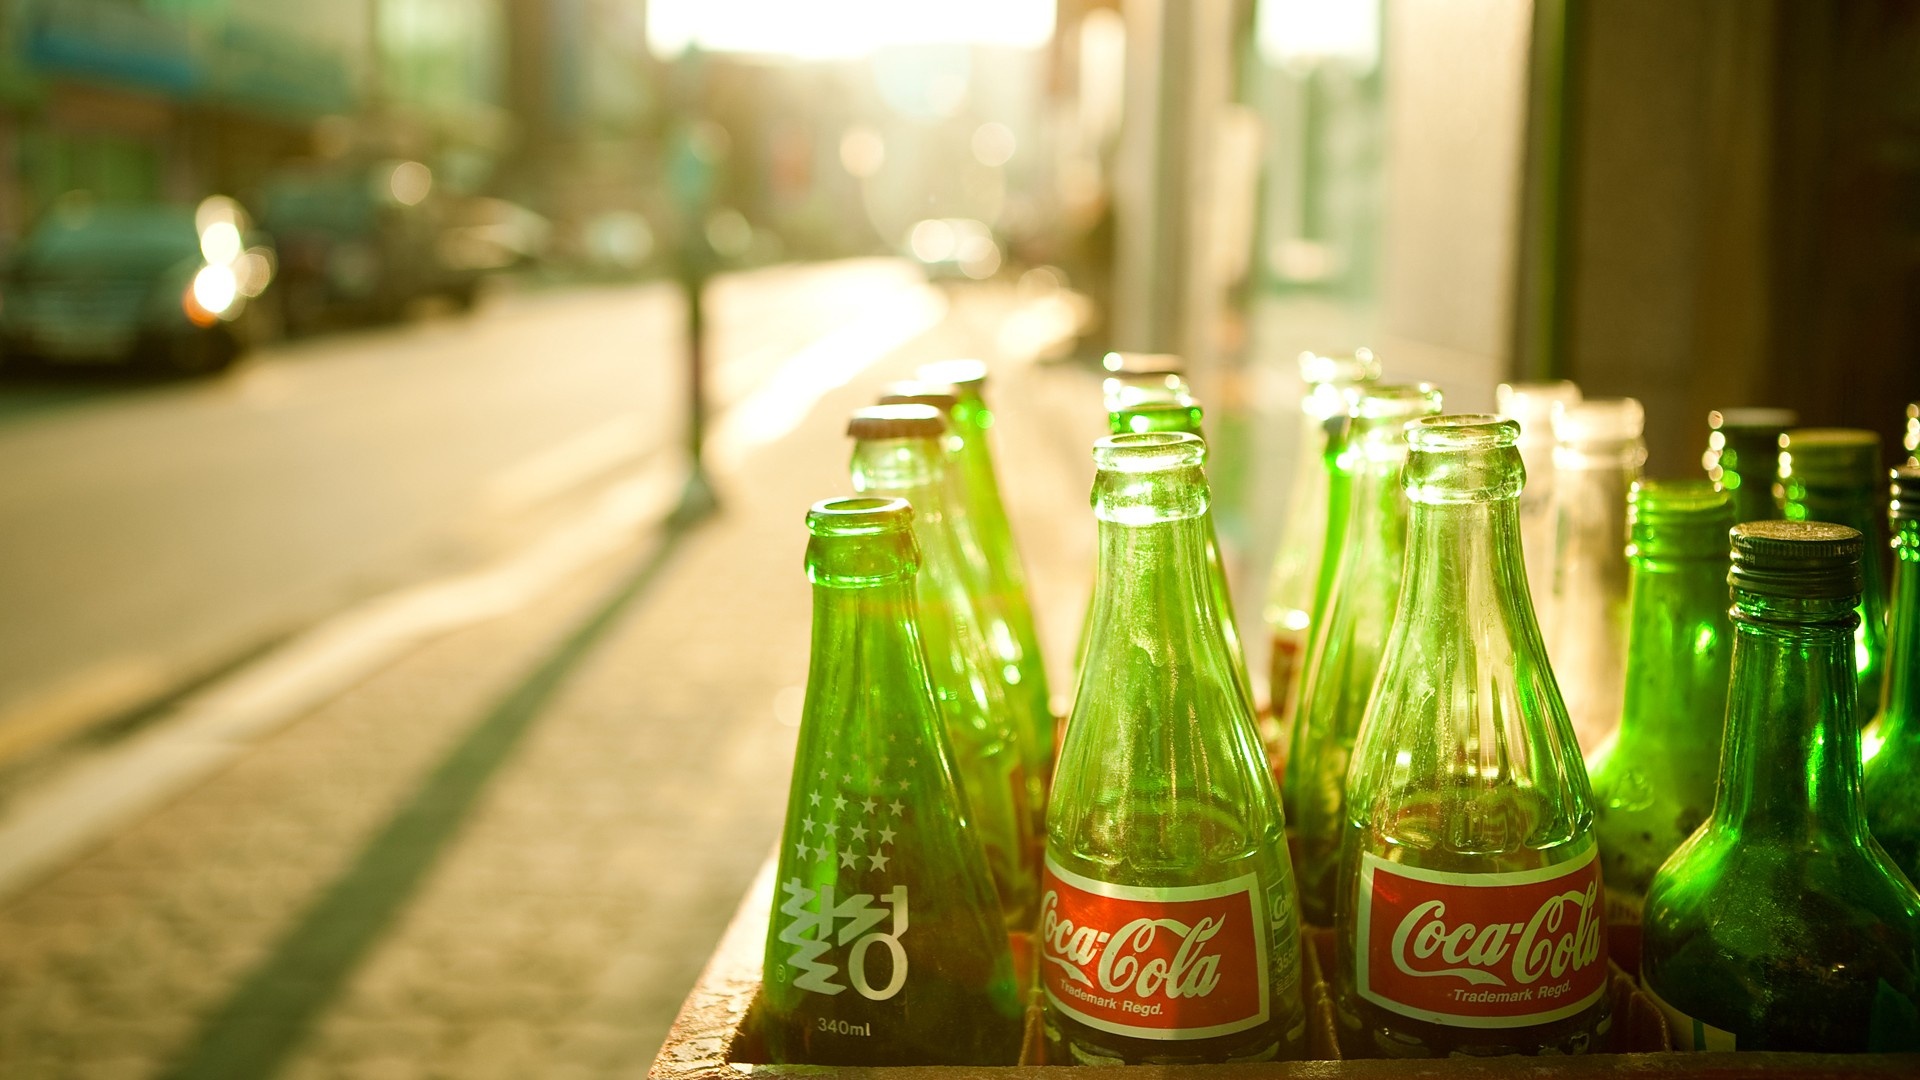 Coca-Cola: The company producing beverages which are recognized all over the globe. 1920x1080 Full HD Wallpaper.